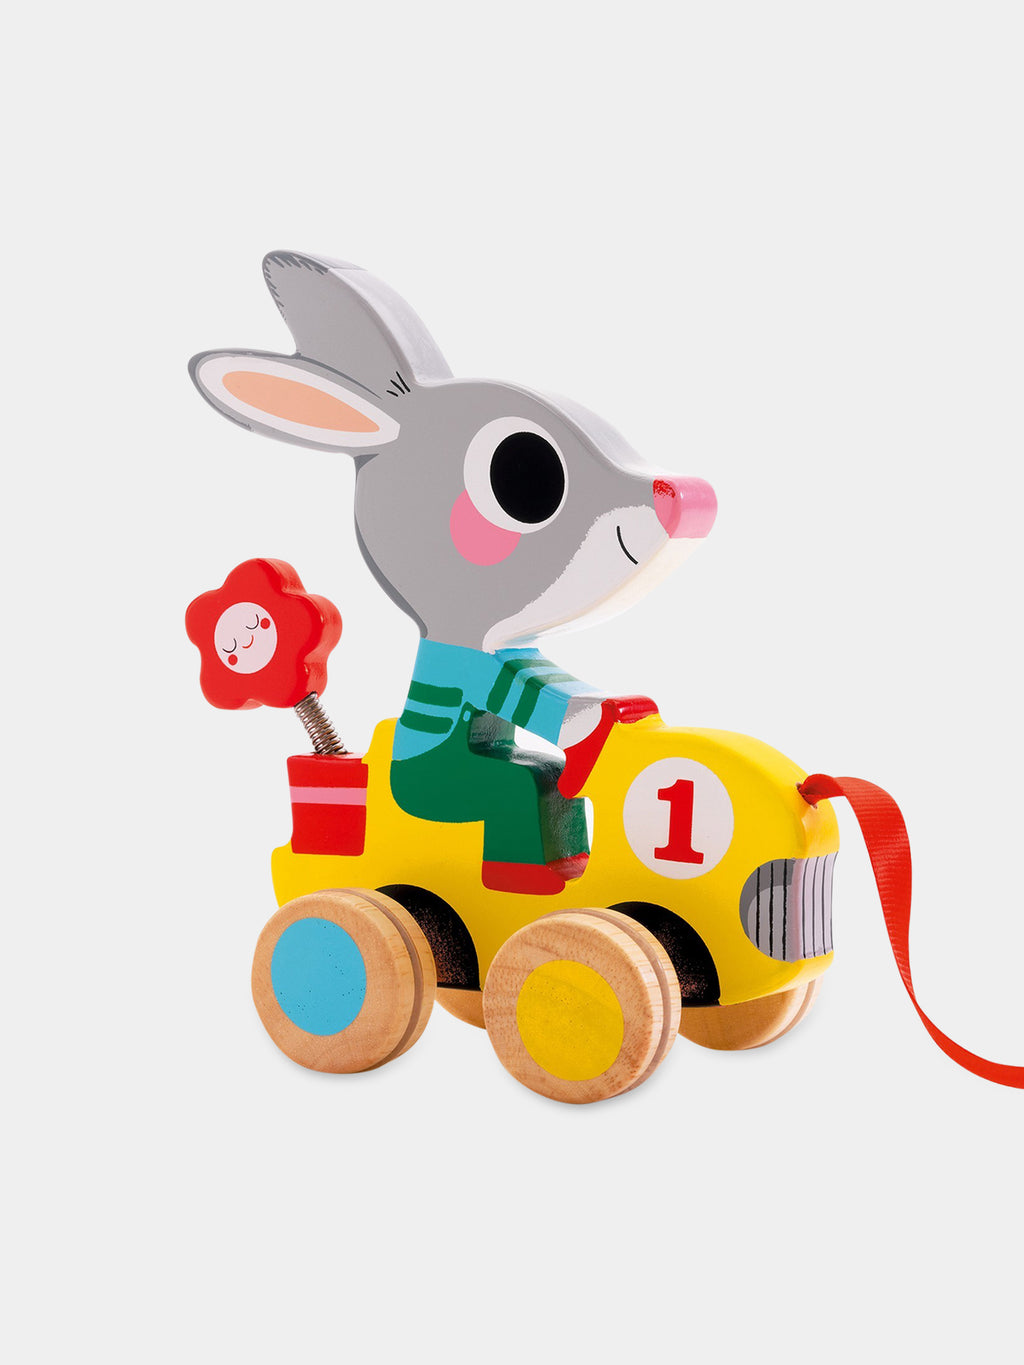 Rabbit-shaped pull-along toy for babies